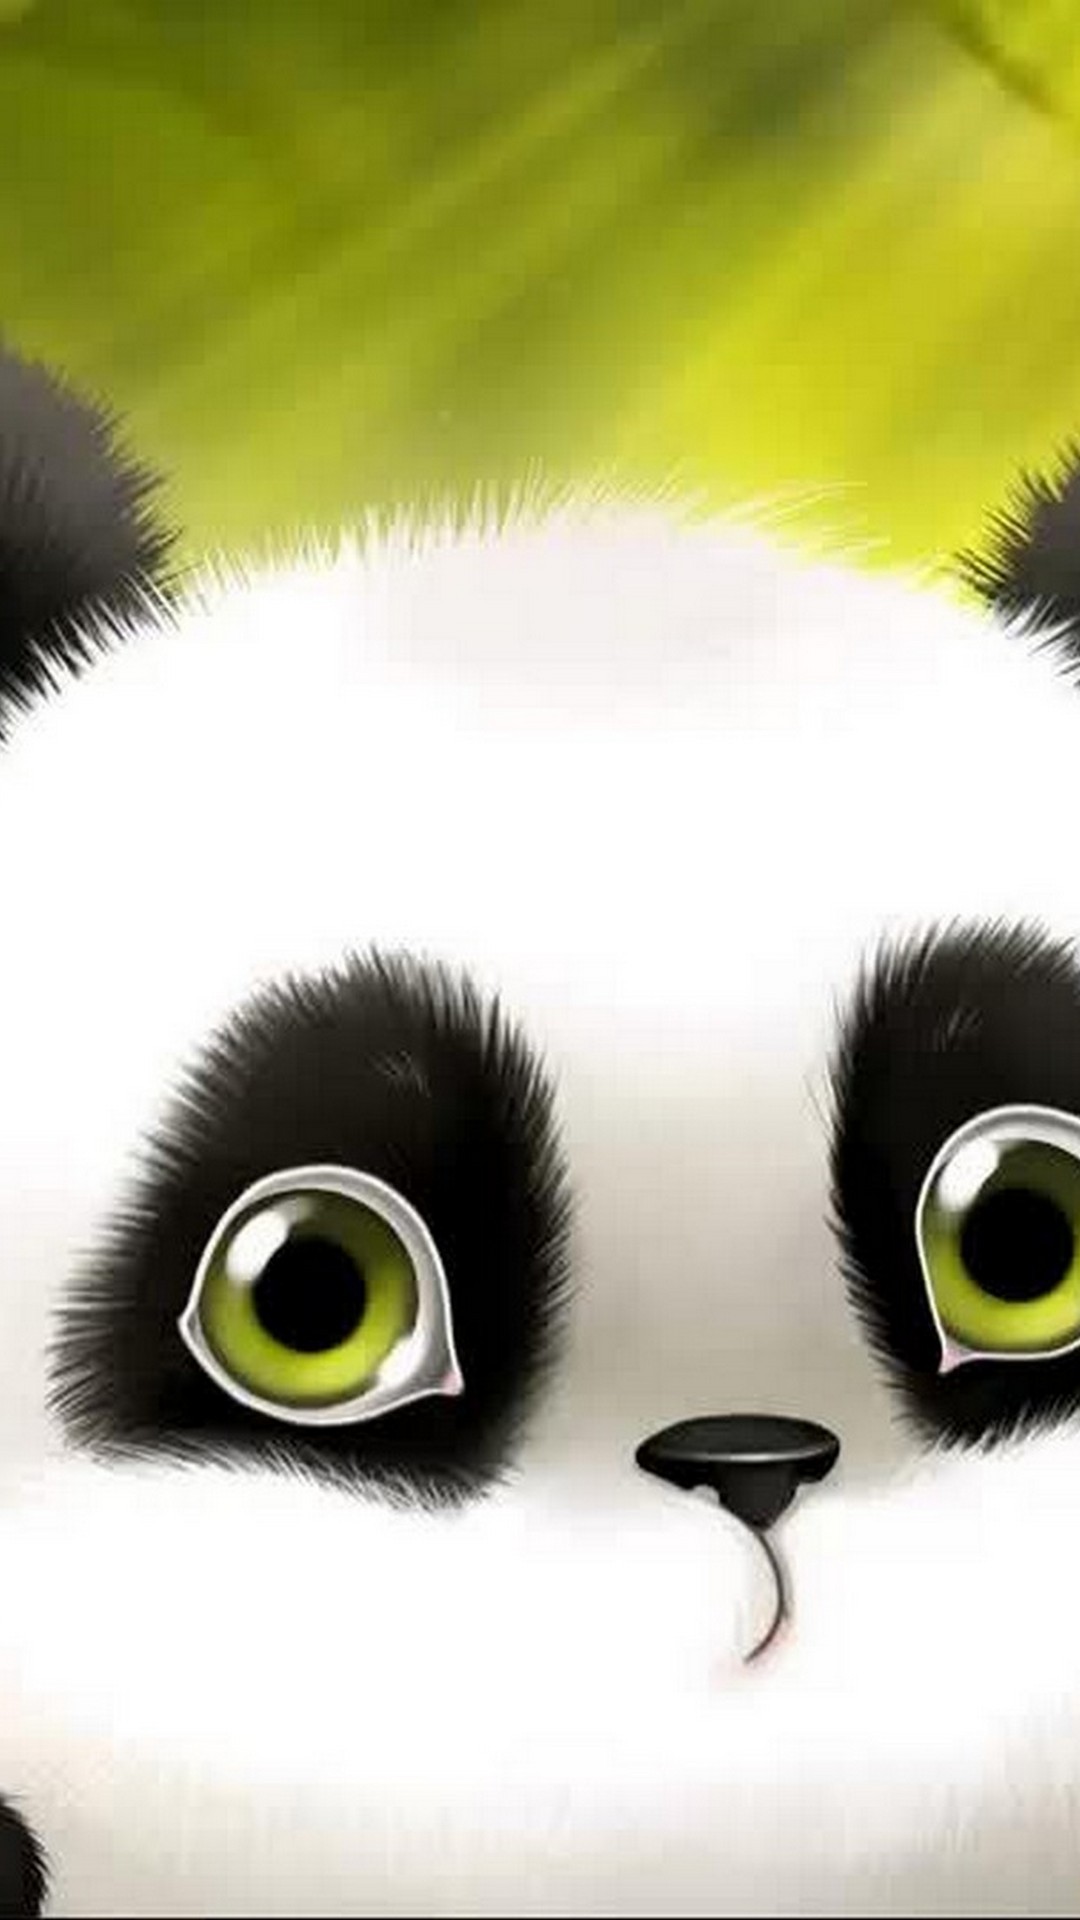 Android Wallpaper HD Cute Panda   2019 Android Wallpapers 1080x1920